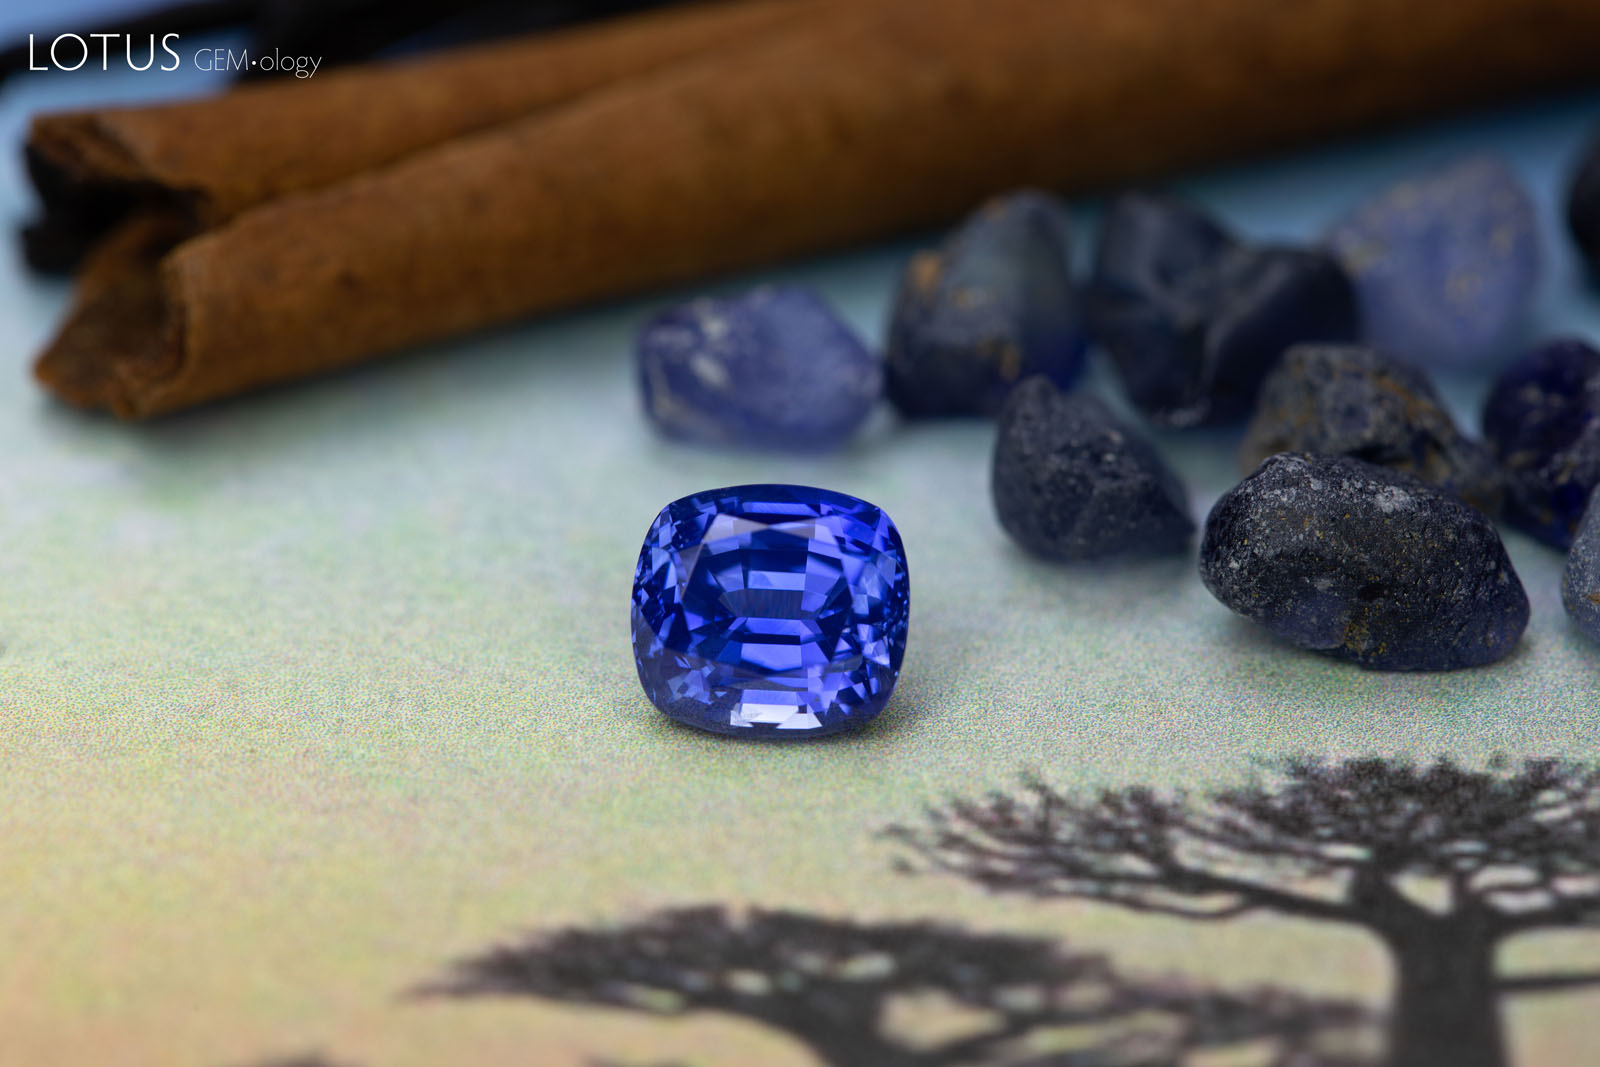 Sapphires from Madagascar: a beautiful 3.29 ct untreated faceted stone and an assortment of rough in the background. Madagascar has produced many high-quality stones in the last few years and is quickly gaining a reputation for fine sapphires equal to any on the planet. Photo by Wimon Manototkul, sapphire courtesy of Neil Doohan.